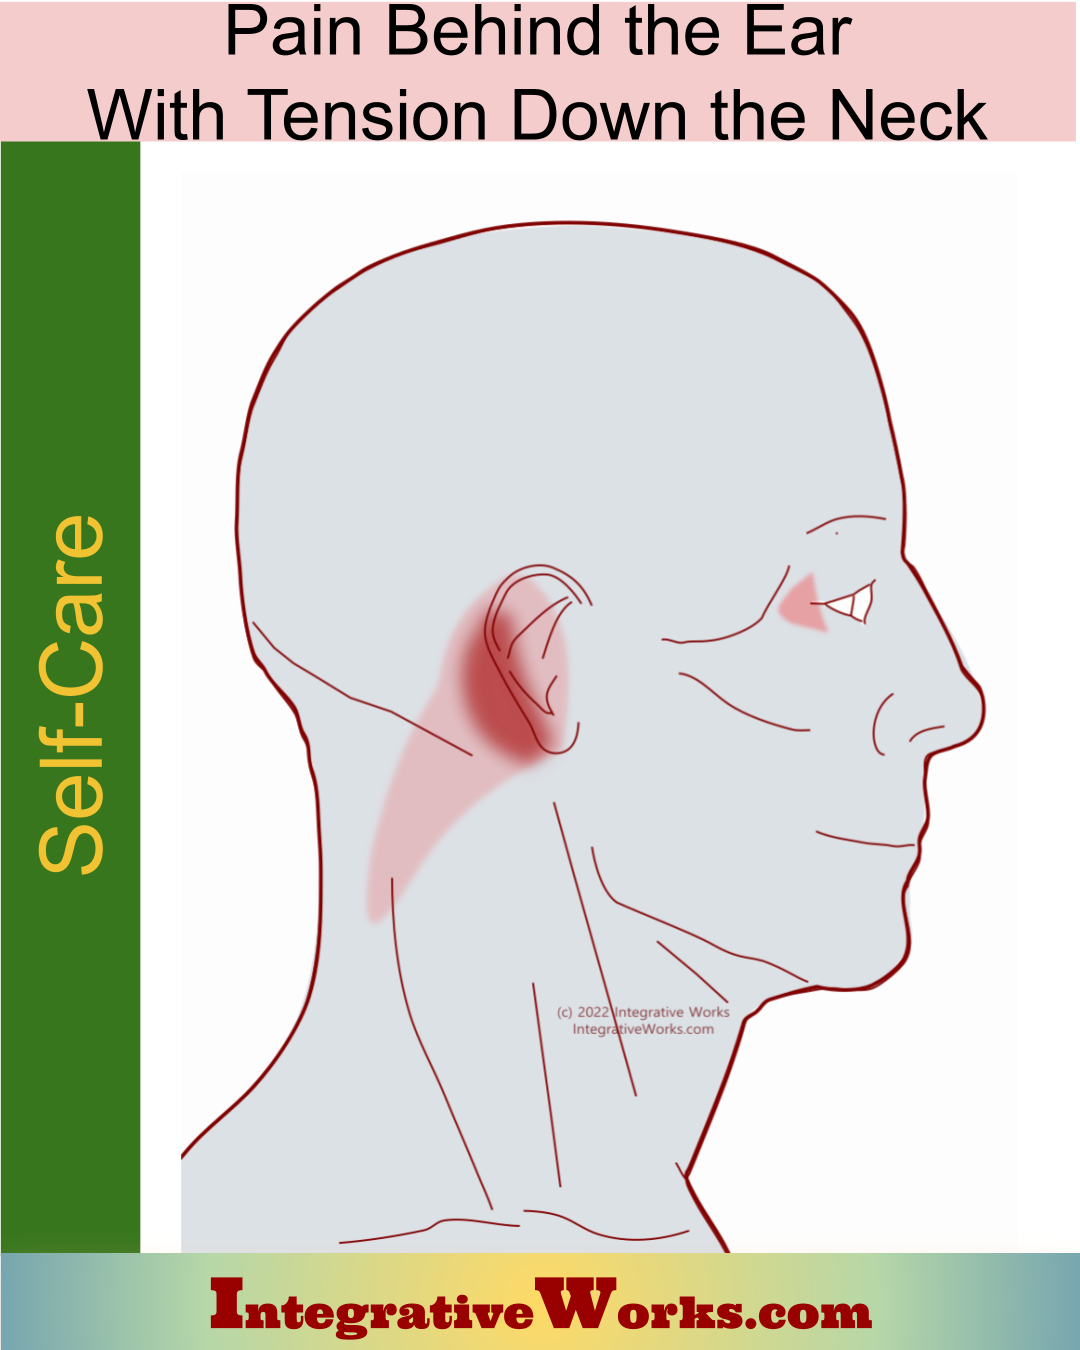 Self-Care – Pain Behind the Ear with Tension Down the Neck